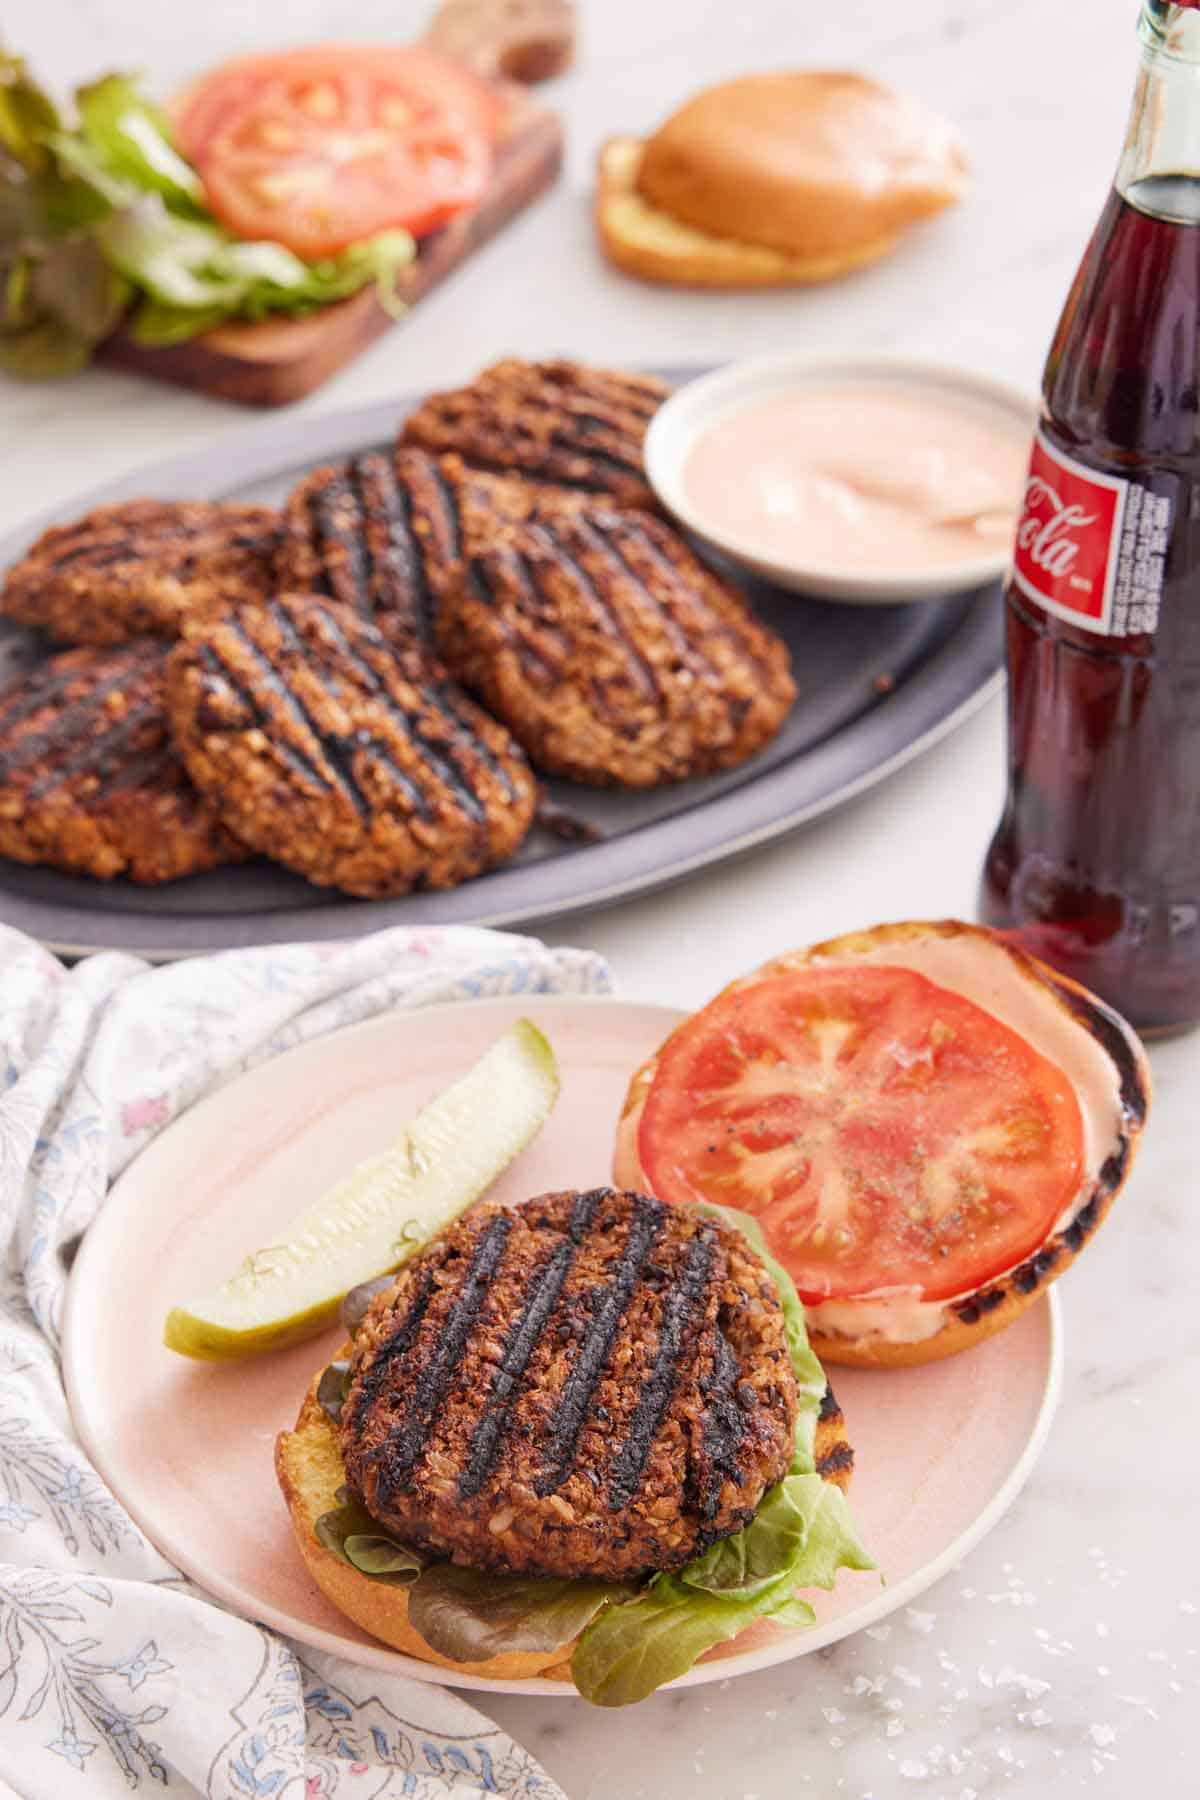 A plate with an opened veggie burger with a bottle of coke and platter of patties in the background.